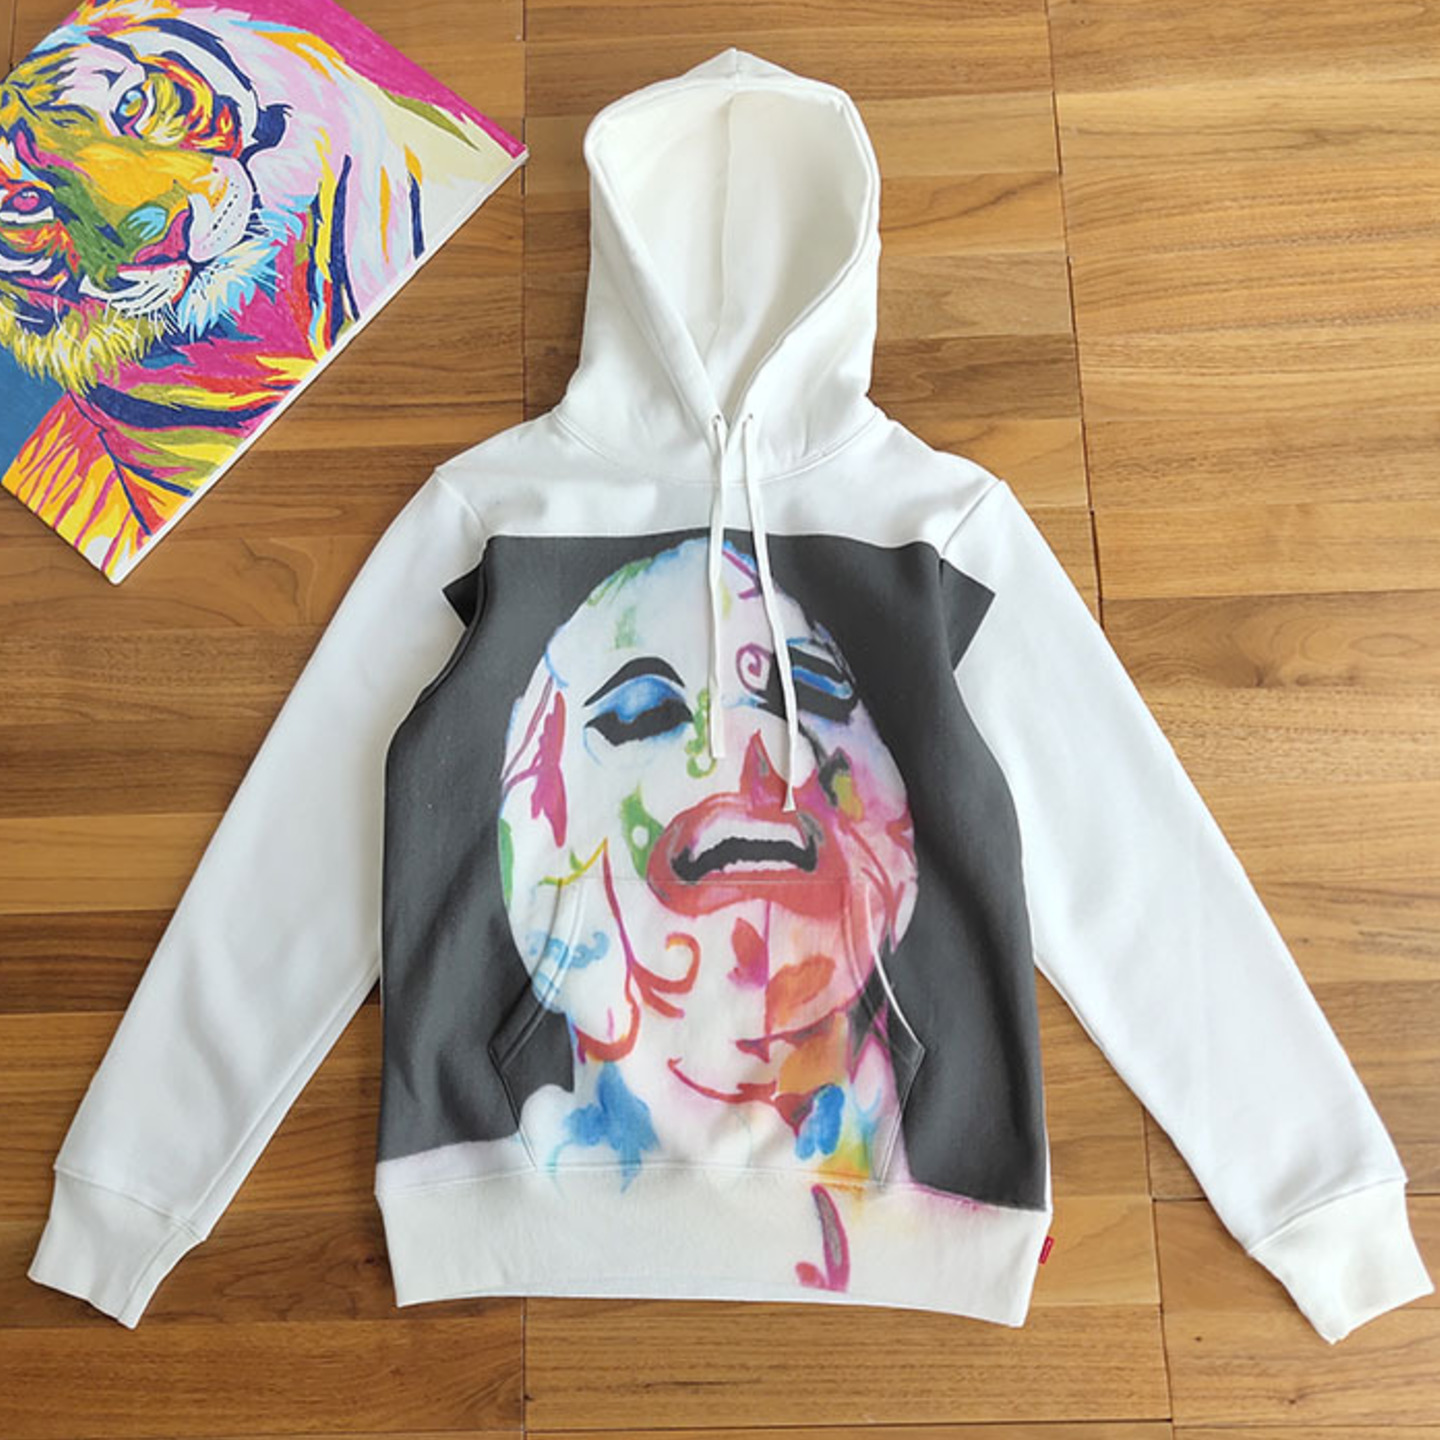 Supreme Leigh Bowery Airbrushed SS20 Hoodie